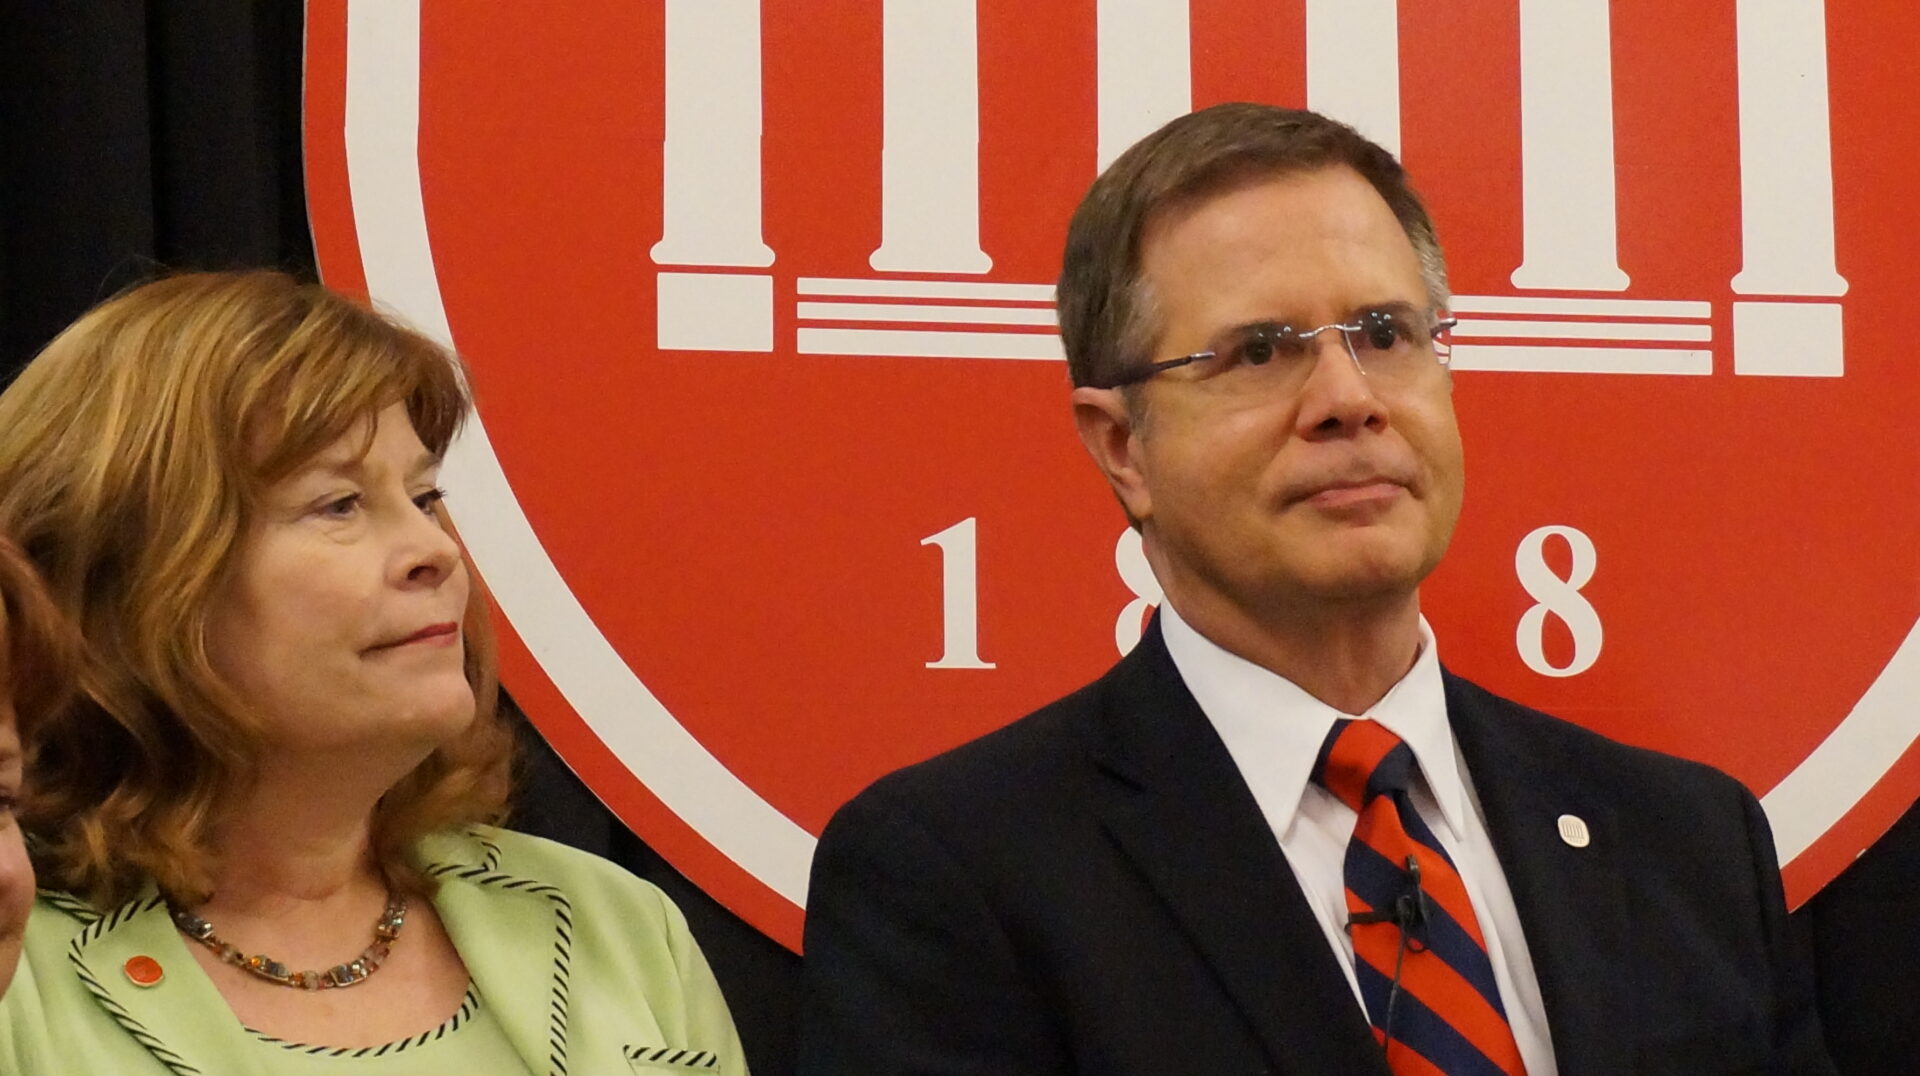 Dr. Jeffrey Vitter with his wife, Sharon